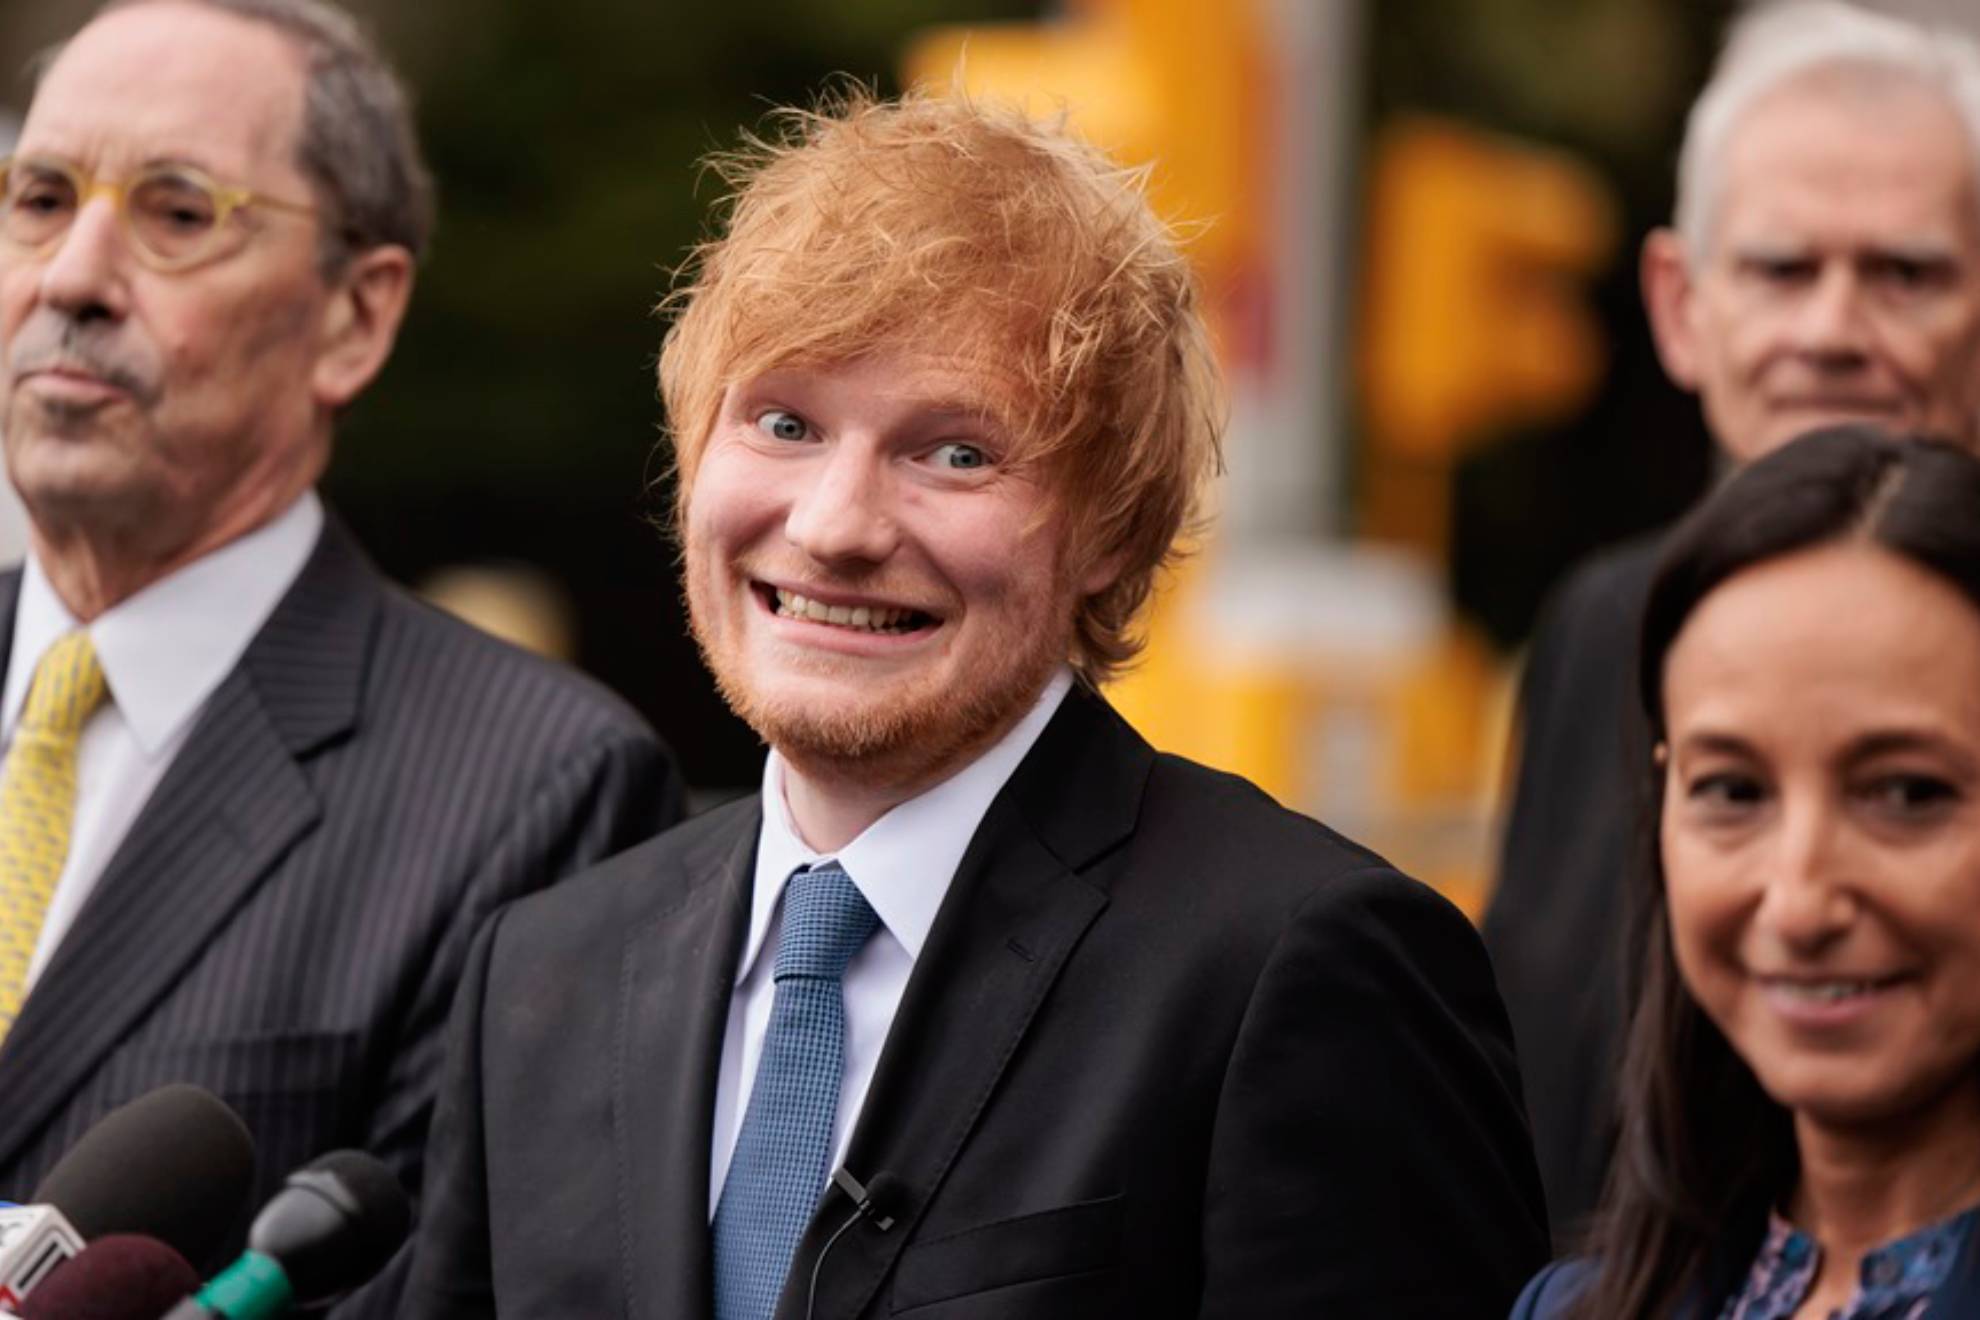 Ed Sheeran confesses to smoking so much pot with Snoop Dogg that he lost his vision